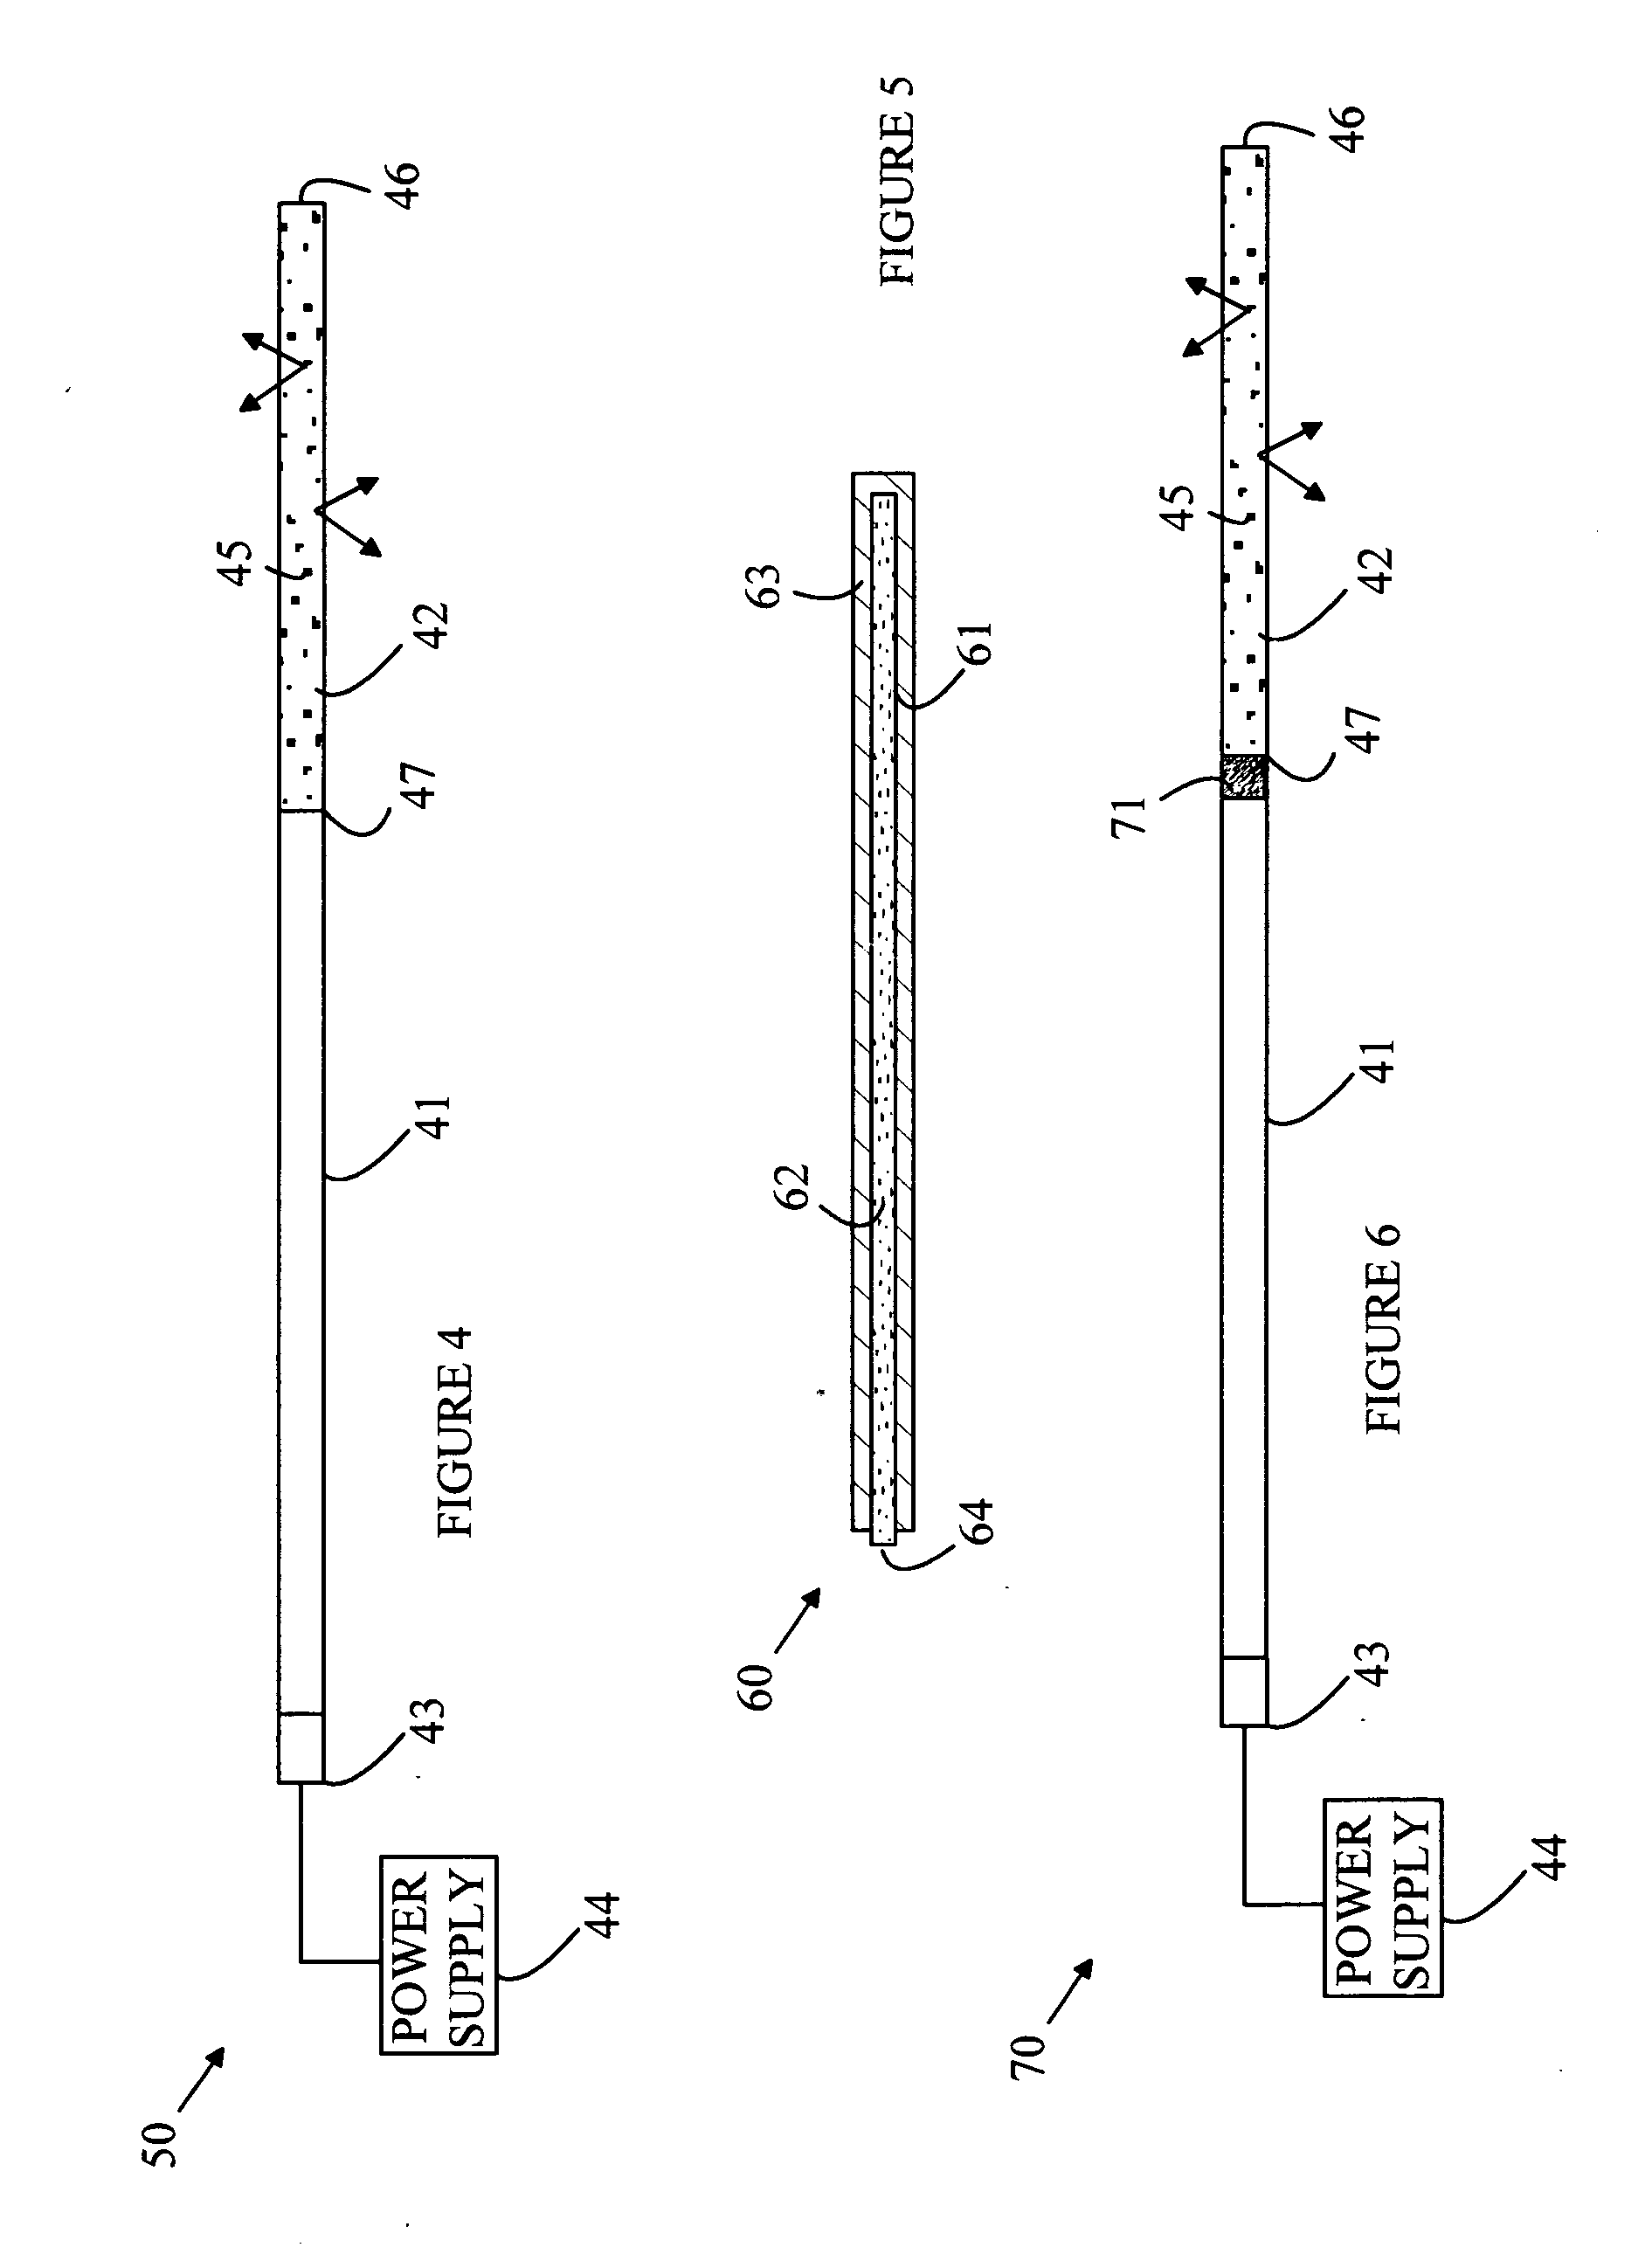 Solid state light source adapted for remote illumination